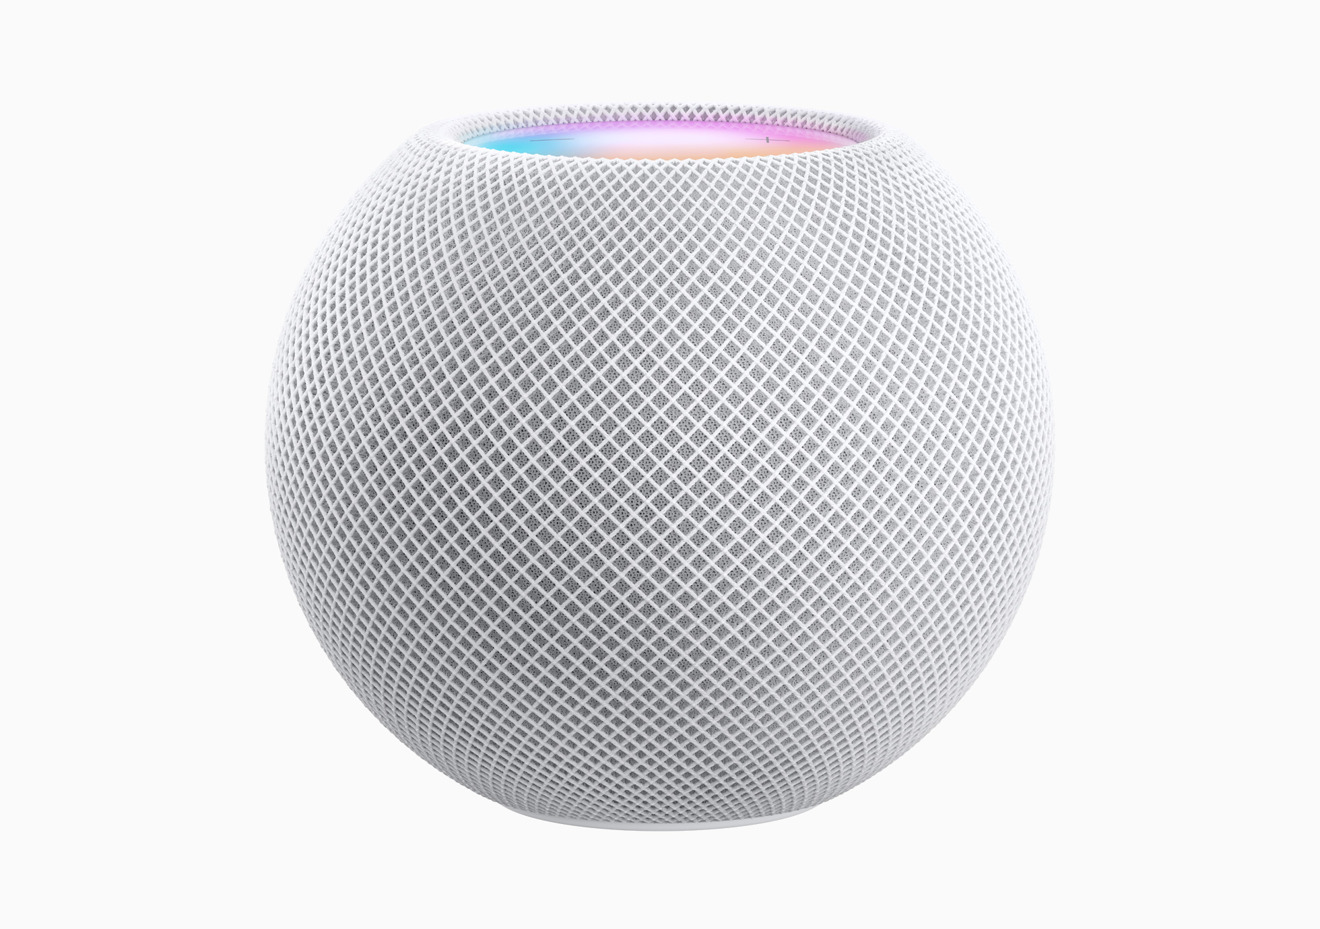 The HomePod mini is spherical, with two cutouts for the screen and to stop it rolling away.